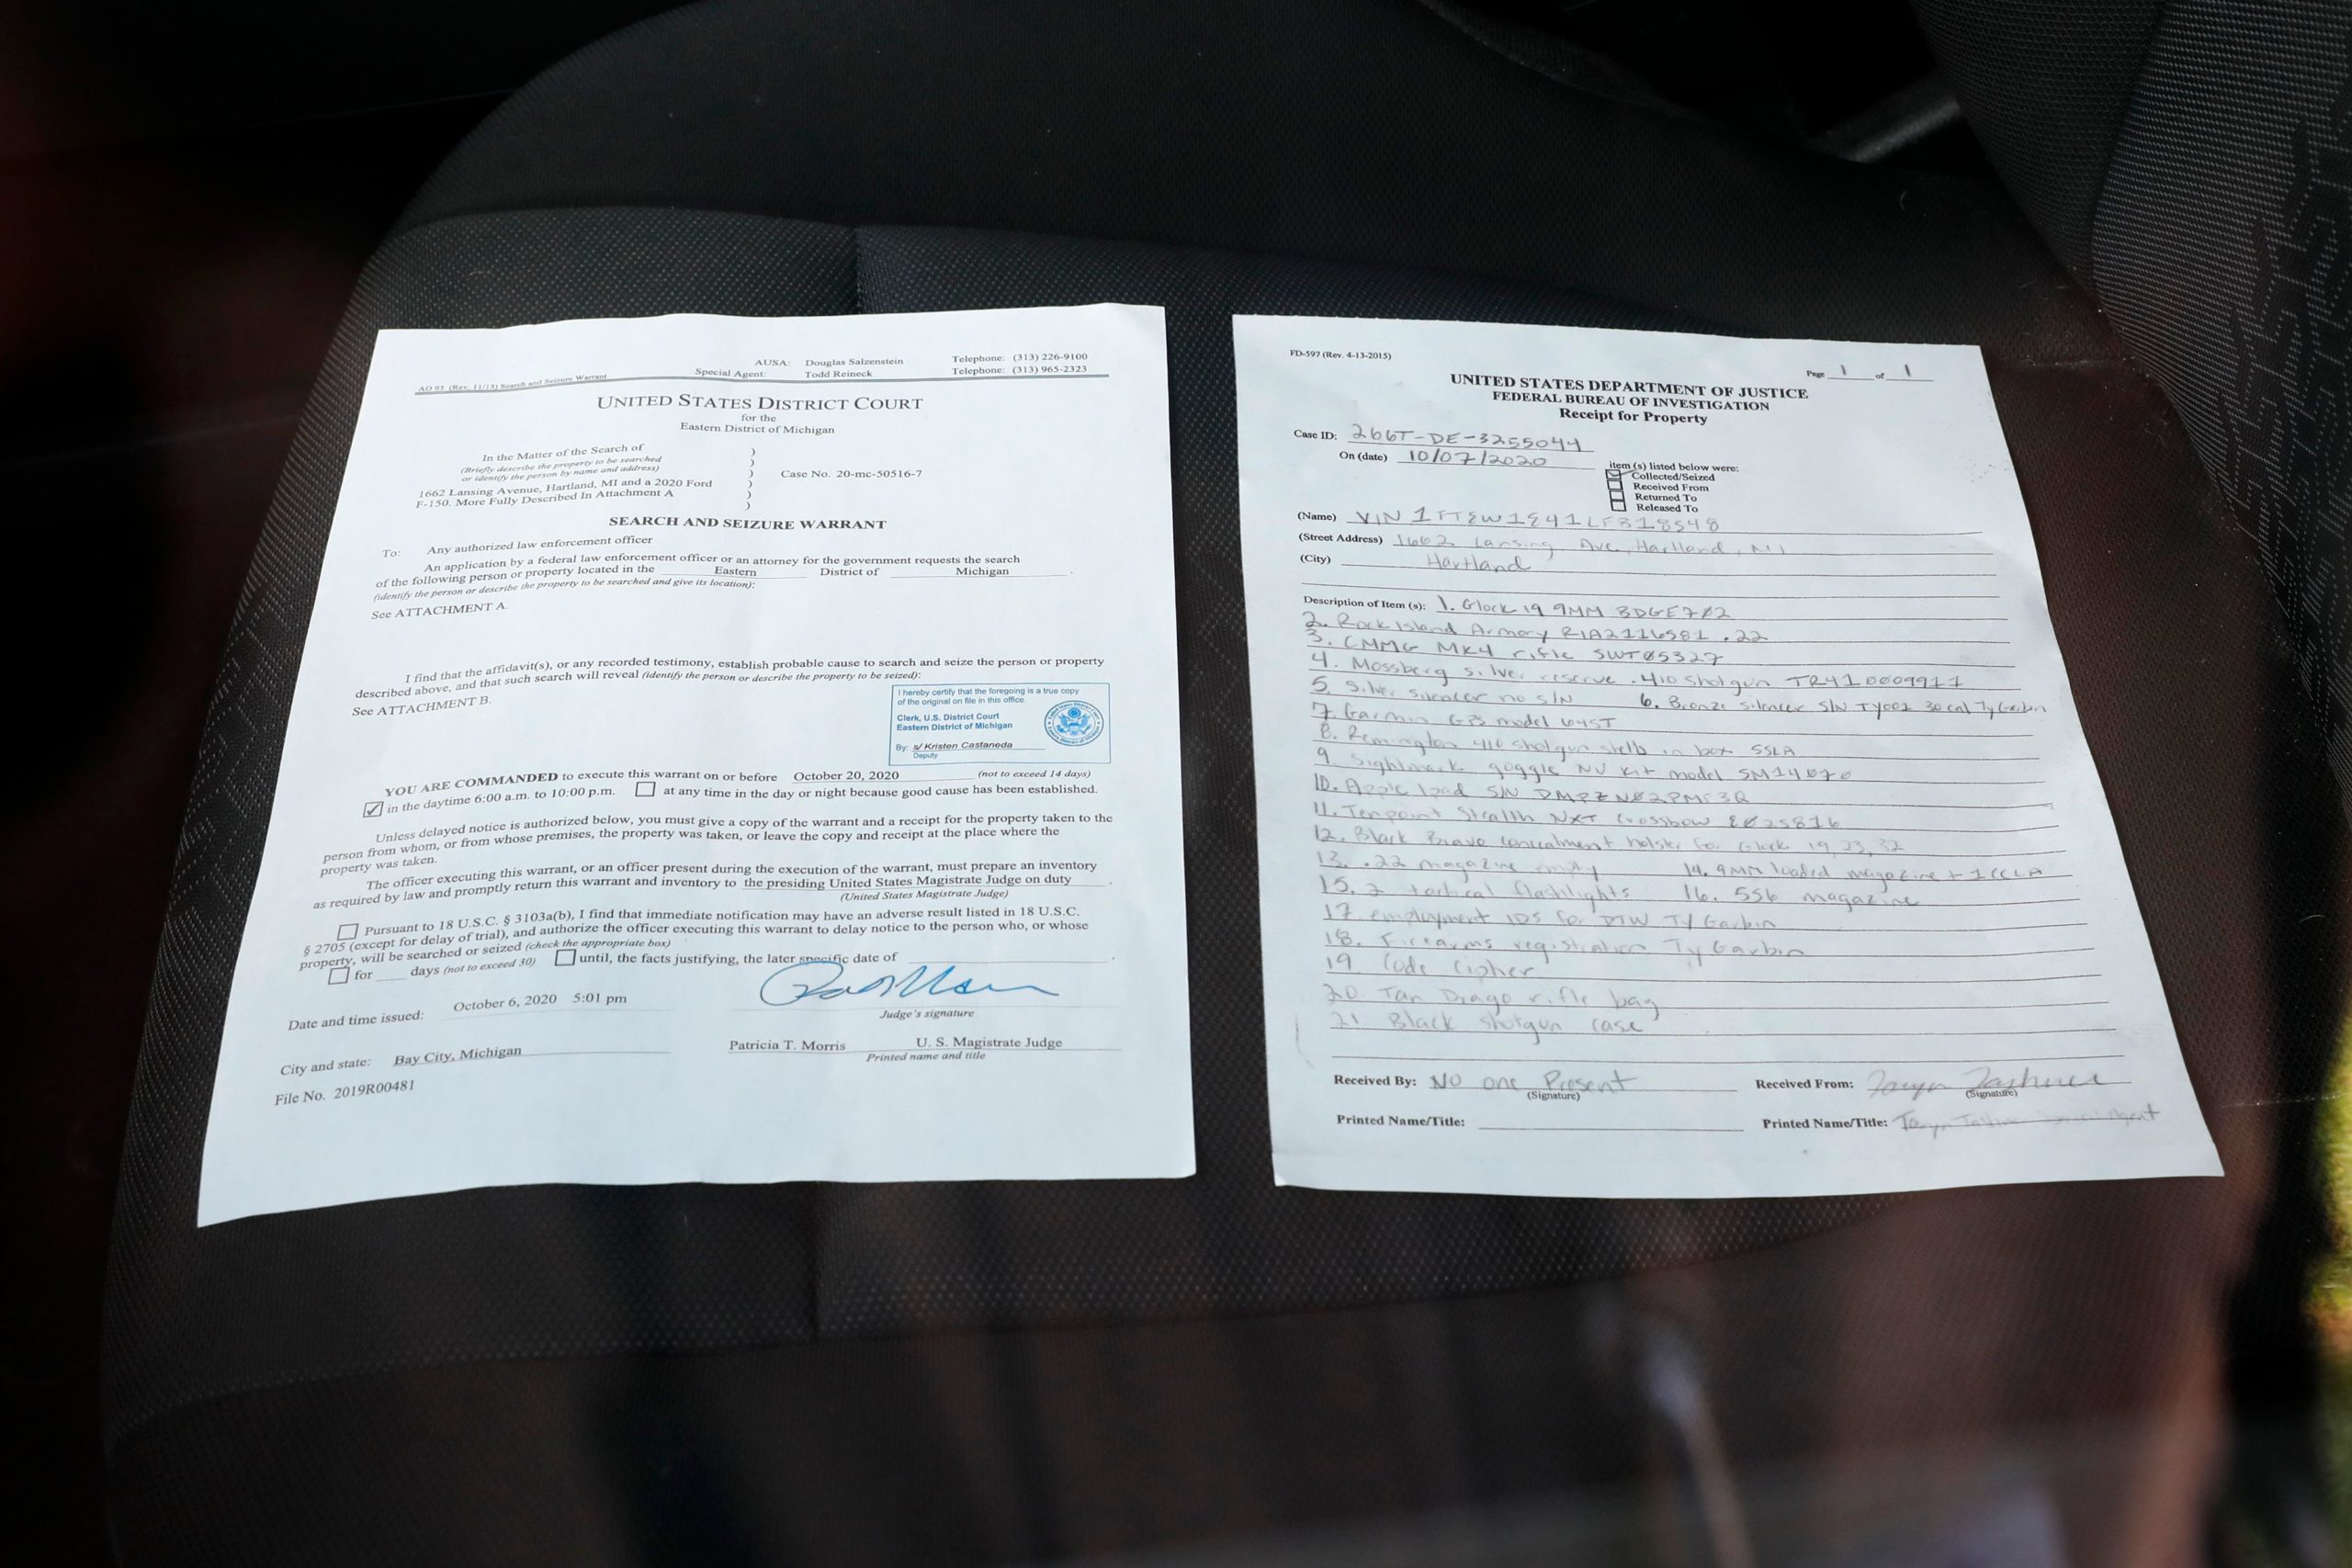 A copy of a search warrant and property list is left on a car seat after FBI searched a home in a Hartland Township mobile home park late Wednesday night and into the morning in connection with a plot to kidnap Michigan Governor Gretchen Whitmer, on October 8, 2020 in Heartland, Michigan. - Six men have been charged as part of a militia plot to kidnap Michigan Governor Gretchen Whitmer, who was repeatedly attacked by President Donald Trump this year for her tough coronavirus lockdown, according to court records released. (Photo by JEFF KOWALSKY / AFP) (Photo by JEFF KOWALSKY/AFP via Getty Images)